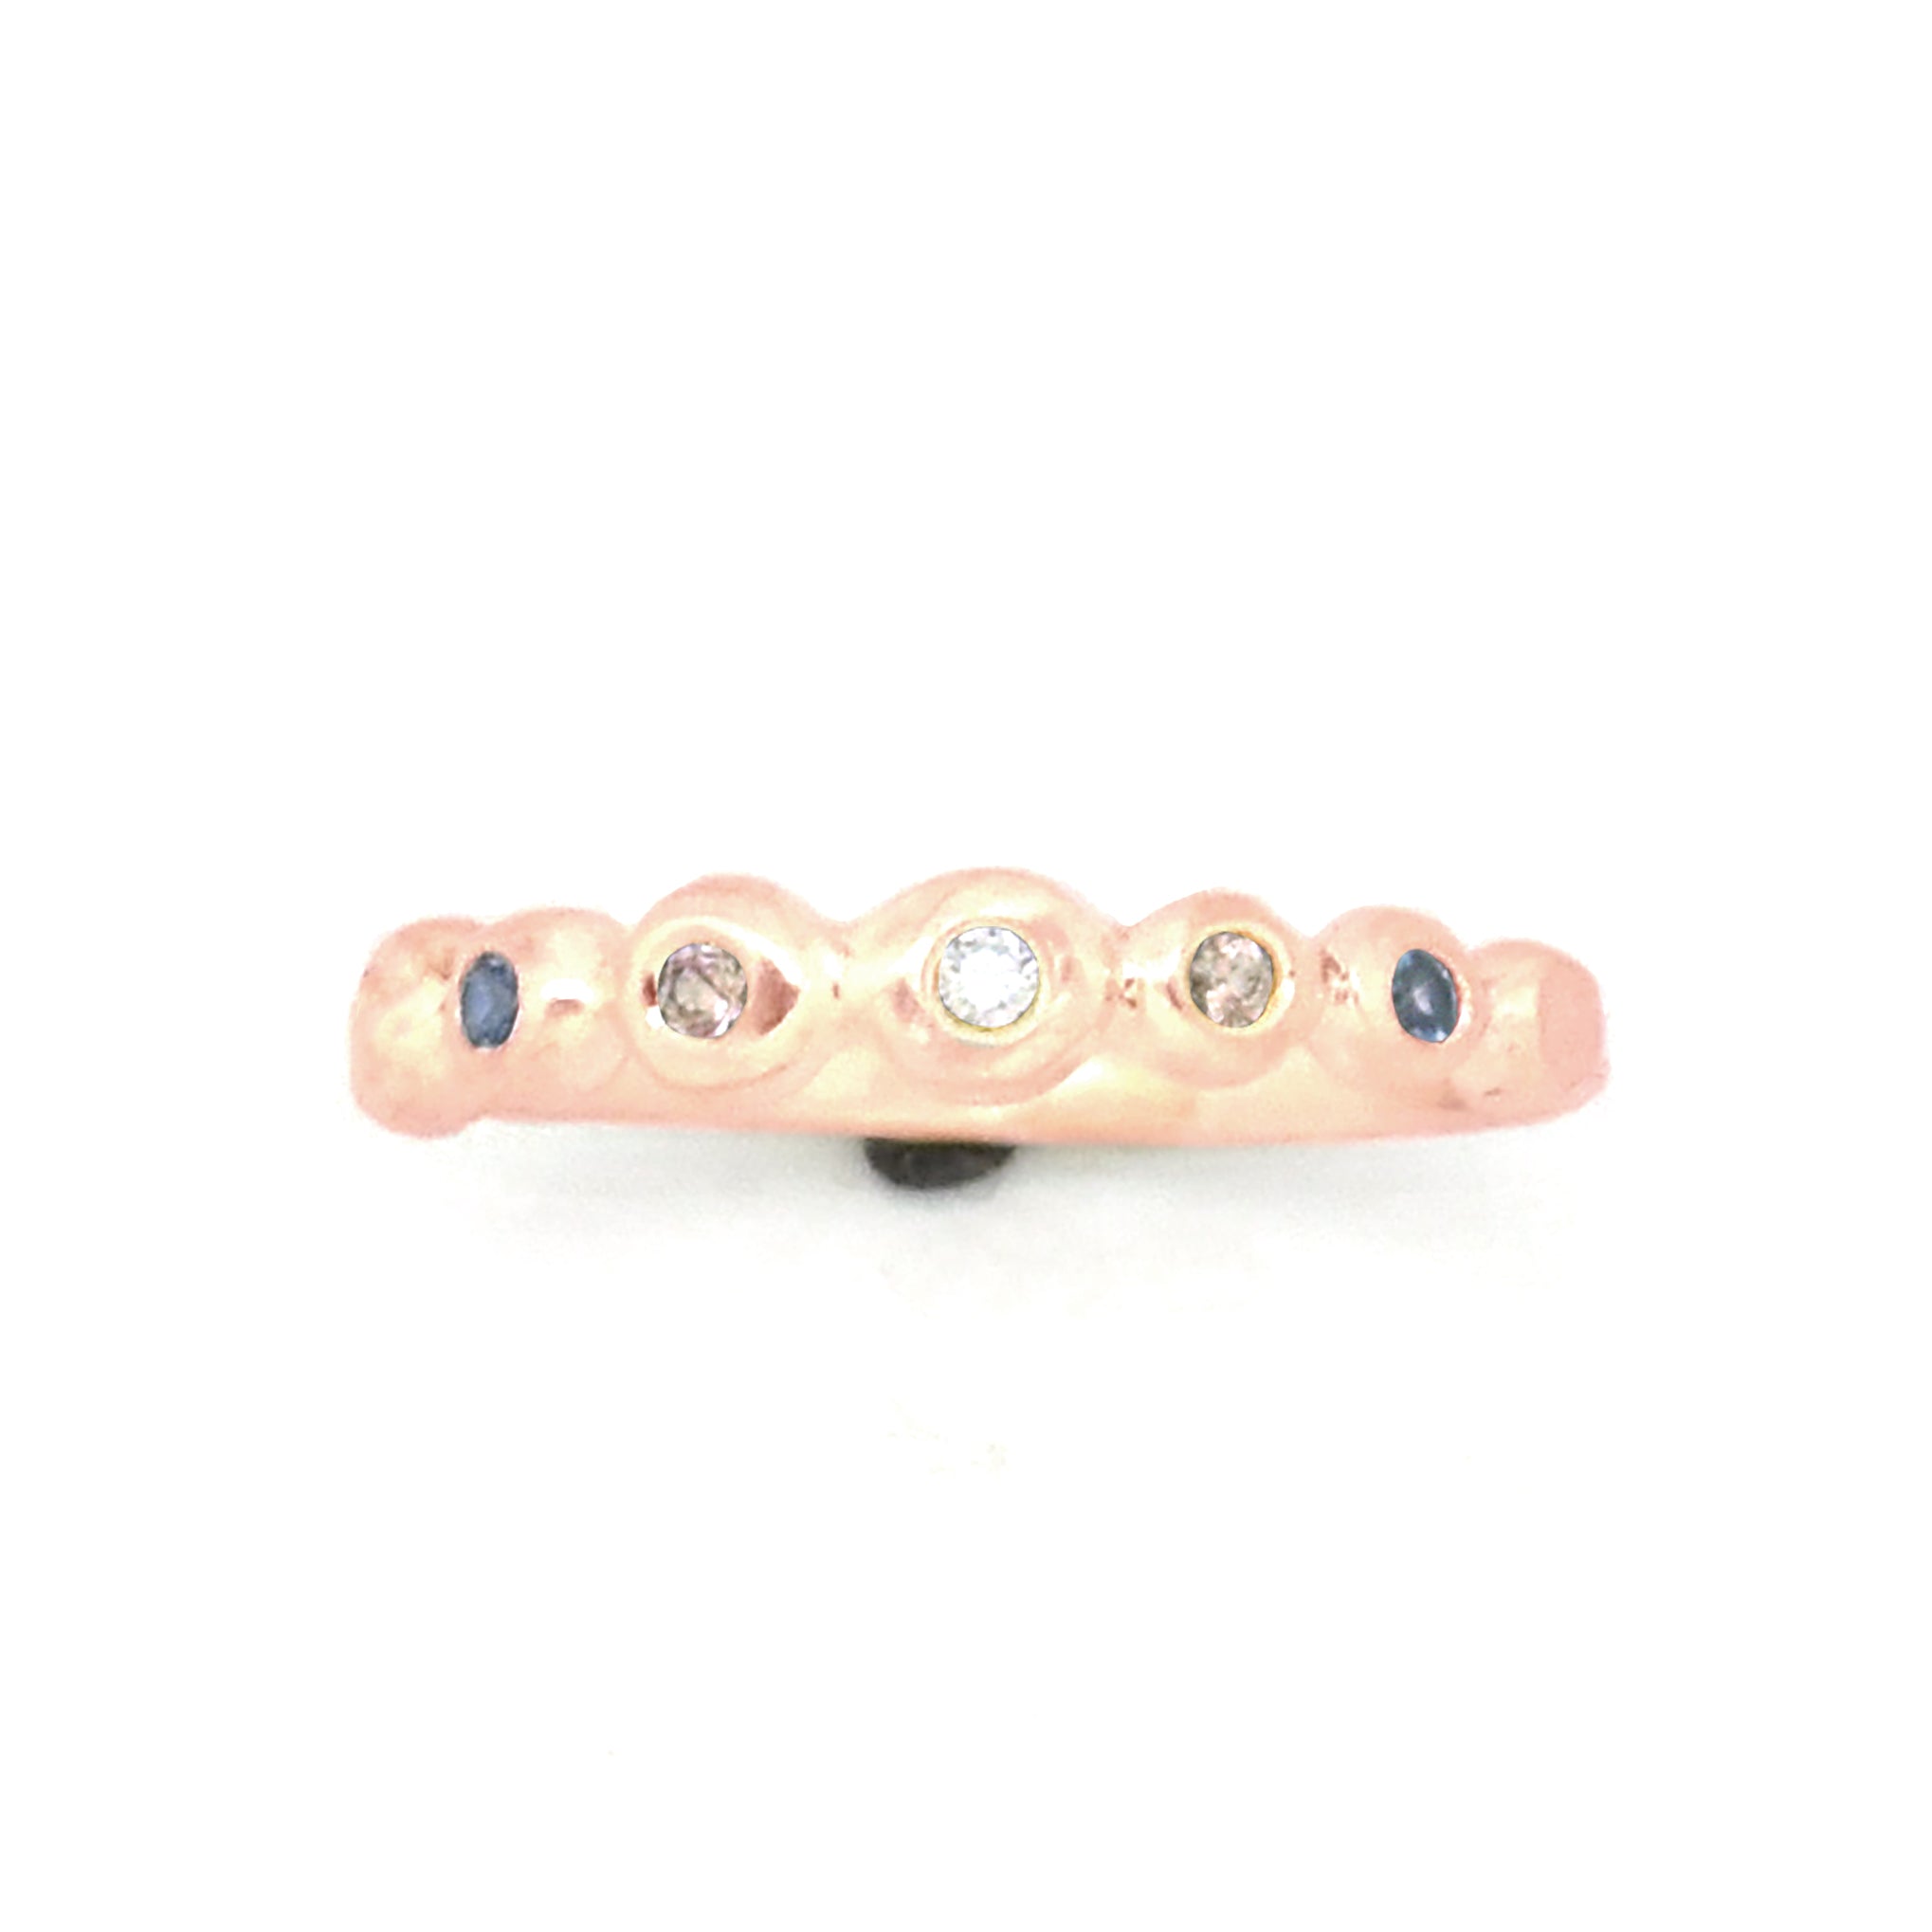 Gold Trans Pride Ring - your choice of gold - Fundraiser for UP Rainbow Pride - Wedding Ring 18K Palladium White Gold 14K Rose Gold 6417 - handmade by Beth Millner Jewelry